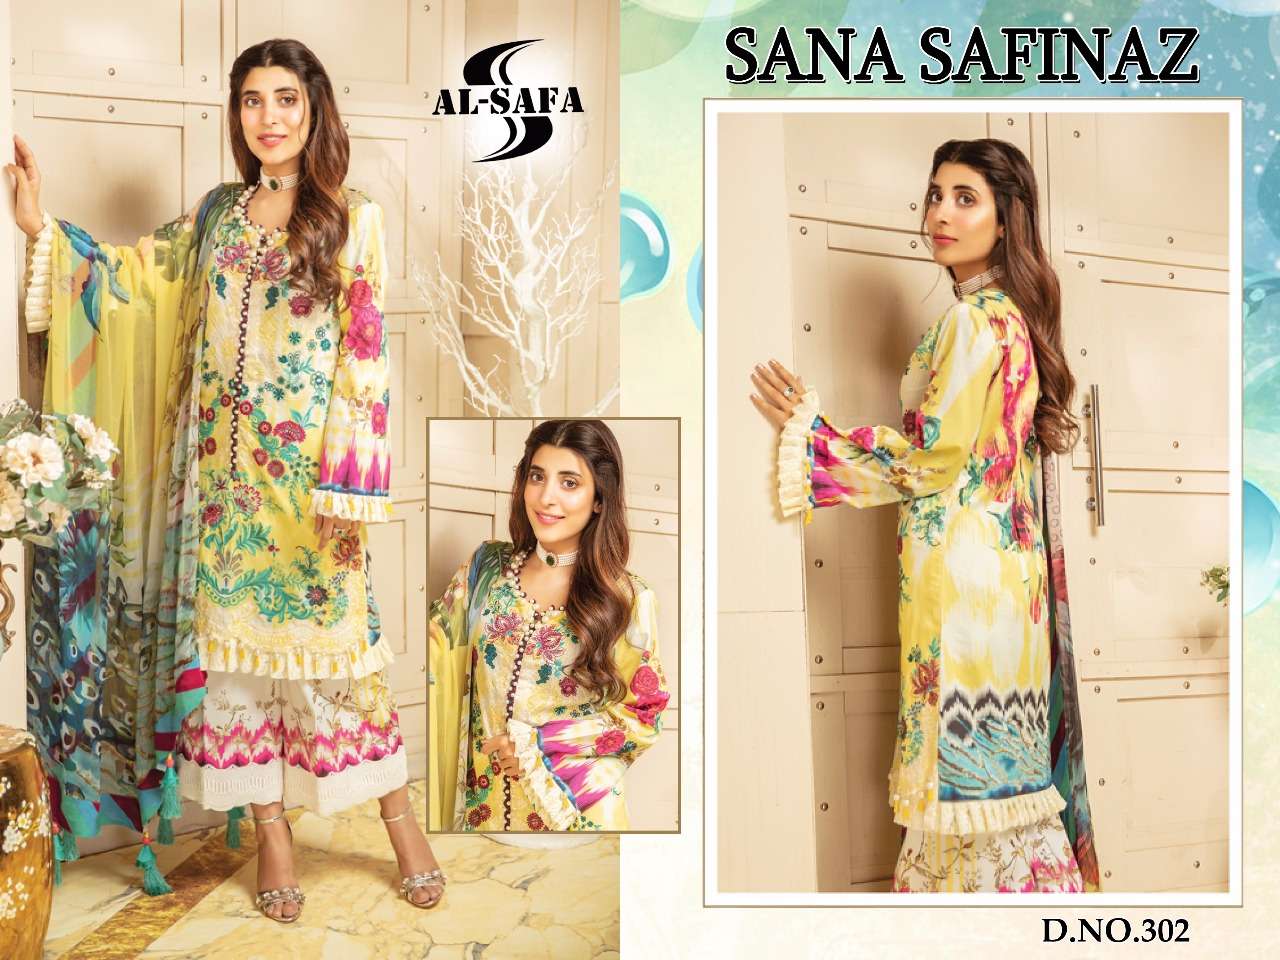 SANA SAFINAZ BY AL-SAFA 301 TO 302 SERIES BEAUTIFUL PAKISTANI SUITS COLORFUL STYLISH FANCY CASUAL WEAR & ETHNIC WEAR COTTON PRINTED WITH EMBROIDERY DRESSES AT WHOLESALE PRICE